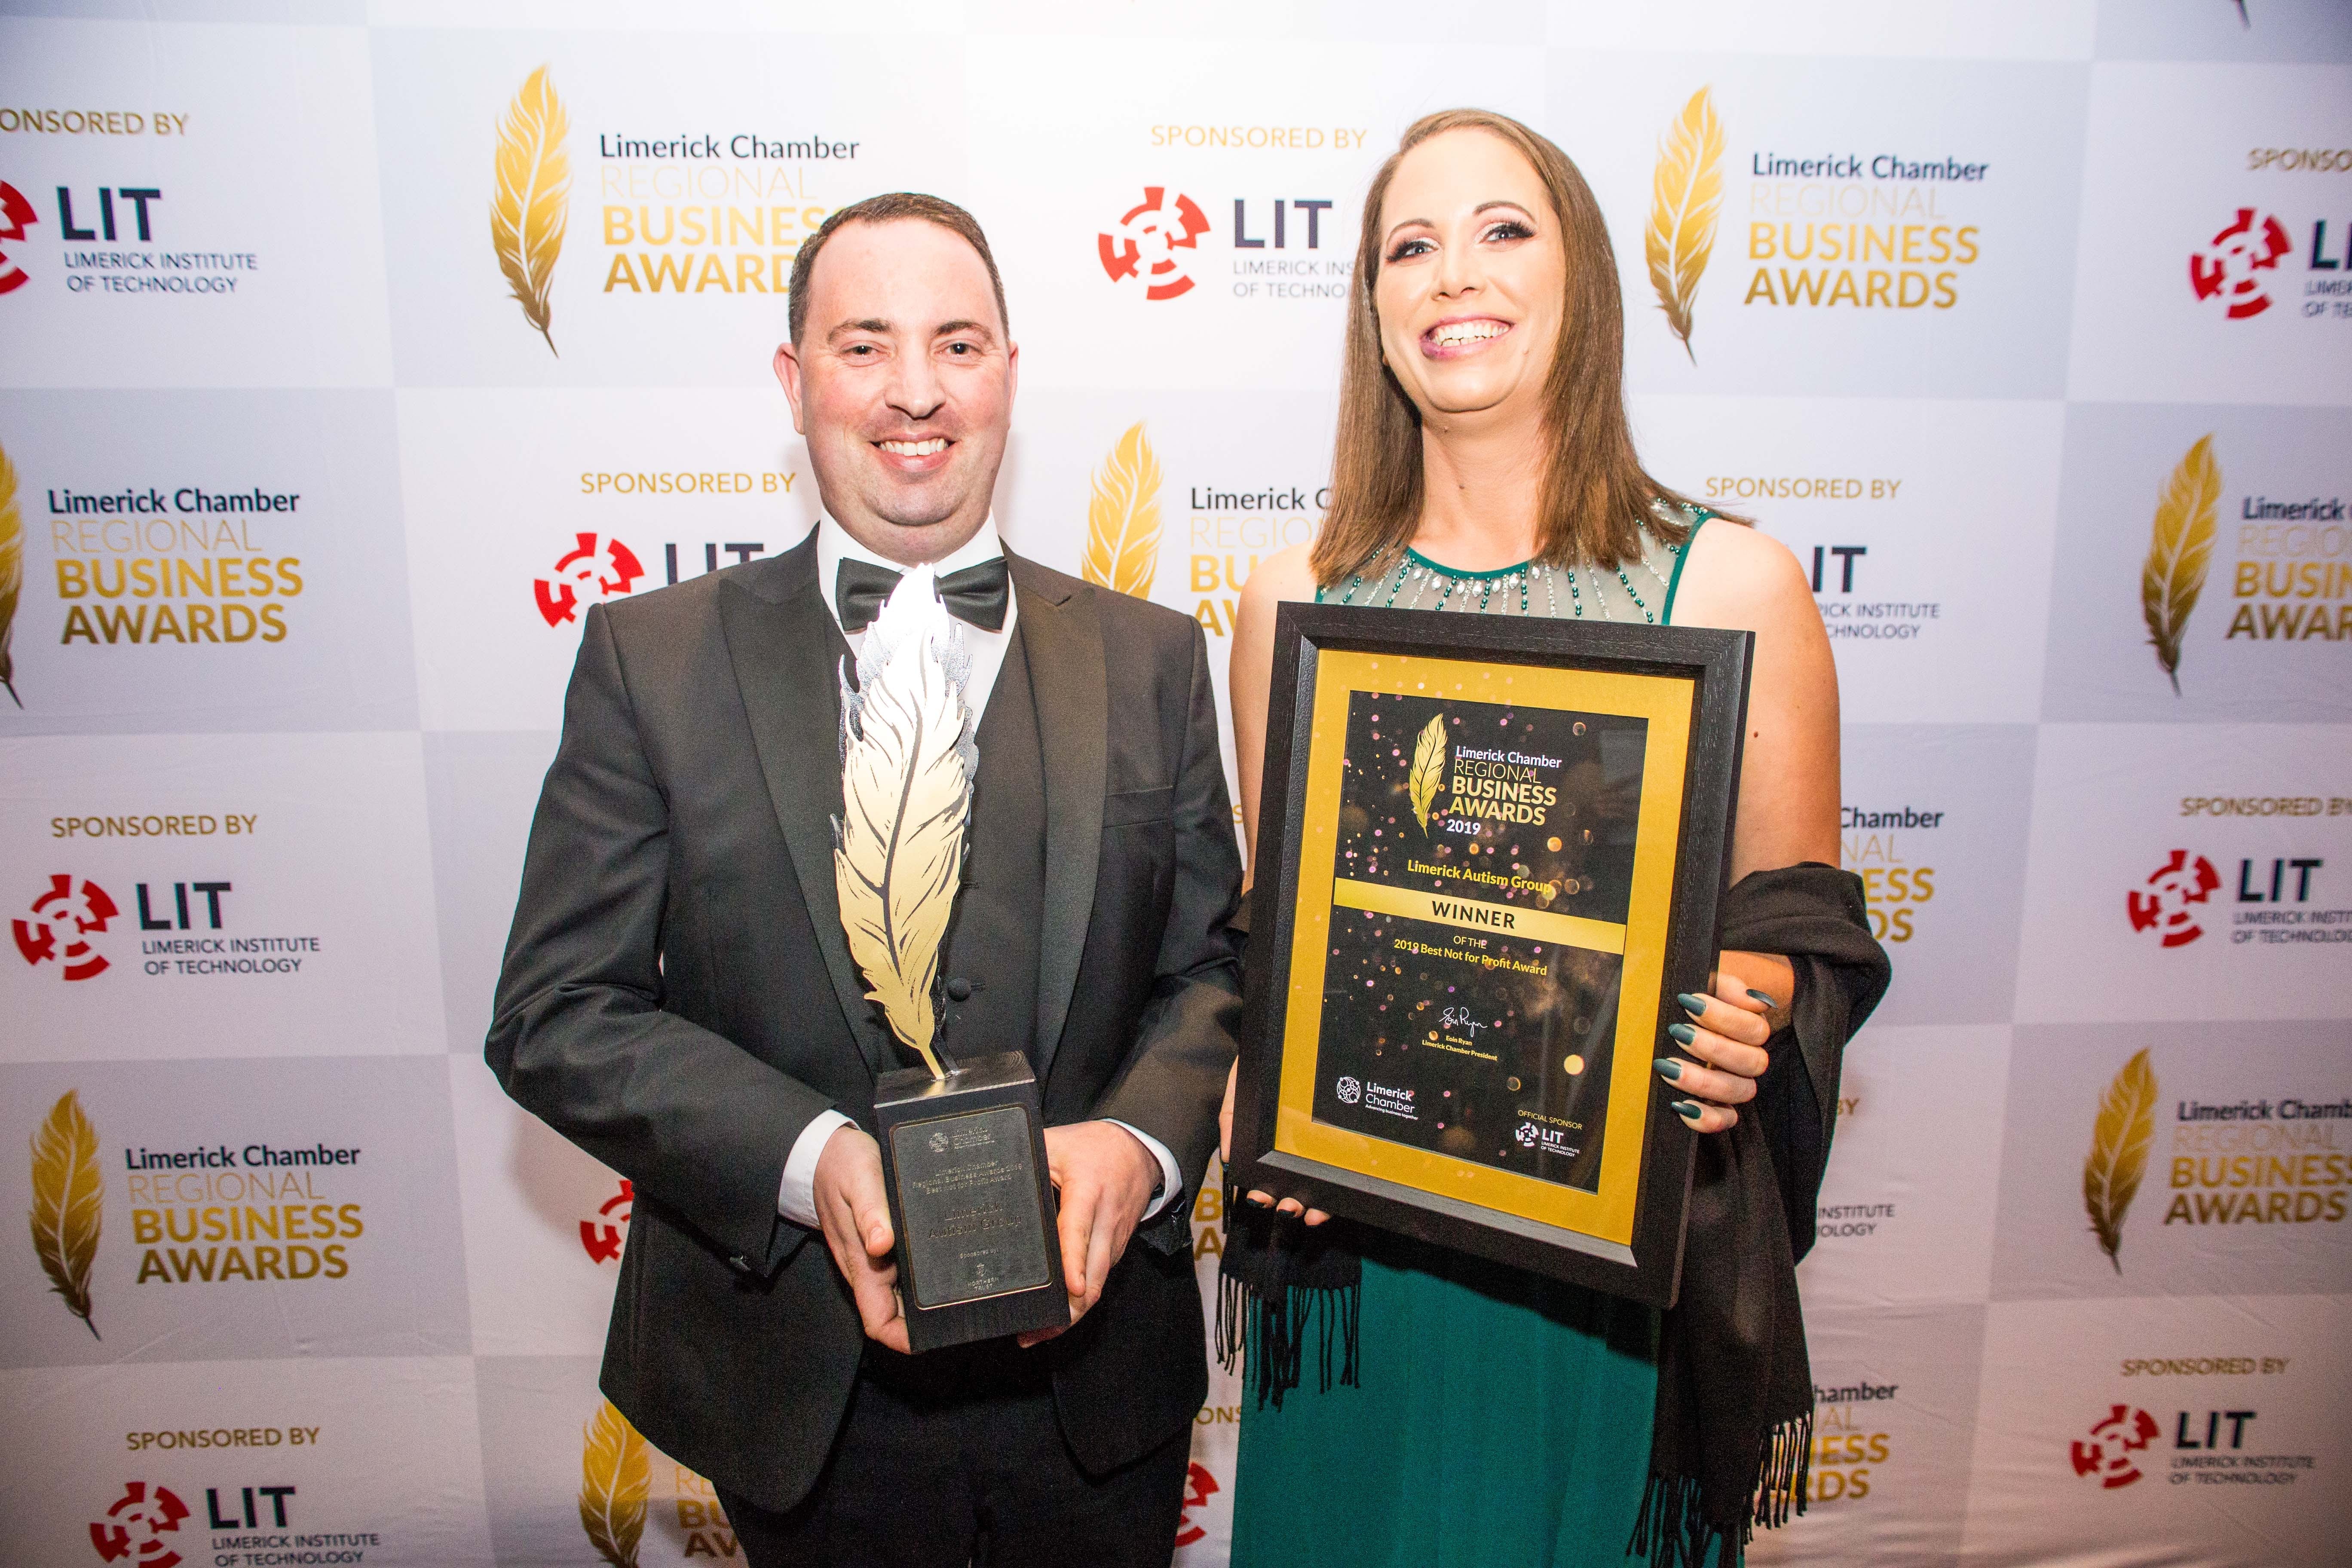 Keith and Candice Enright of Limerick Autism Group pictured with their award for Best Not-For-Profit at the Limerick Chamber President's Dinner. Photo: Cian Reinhardt